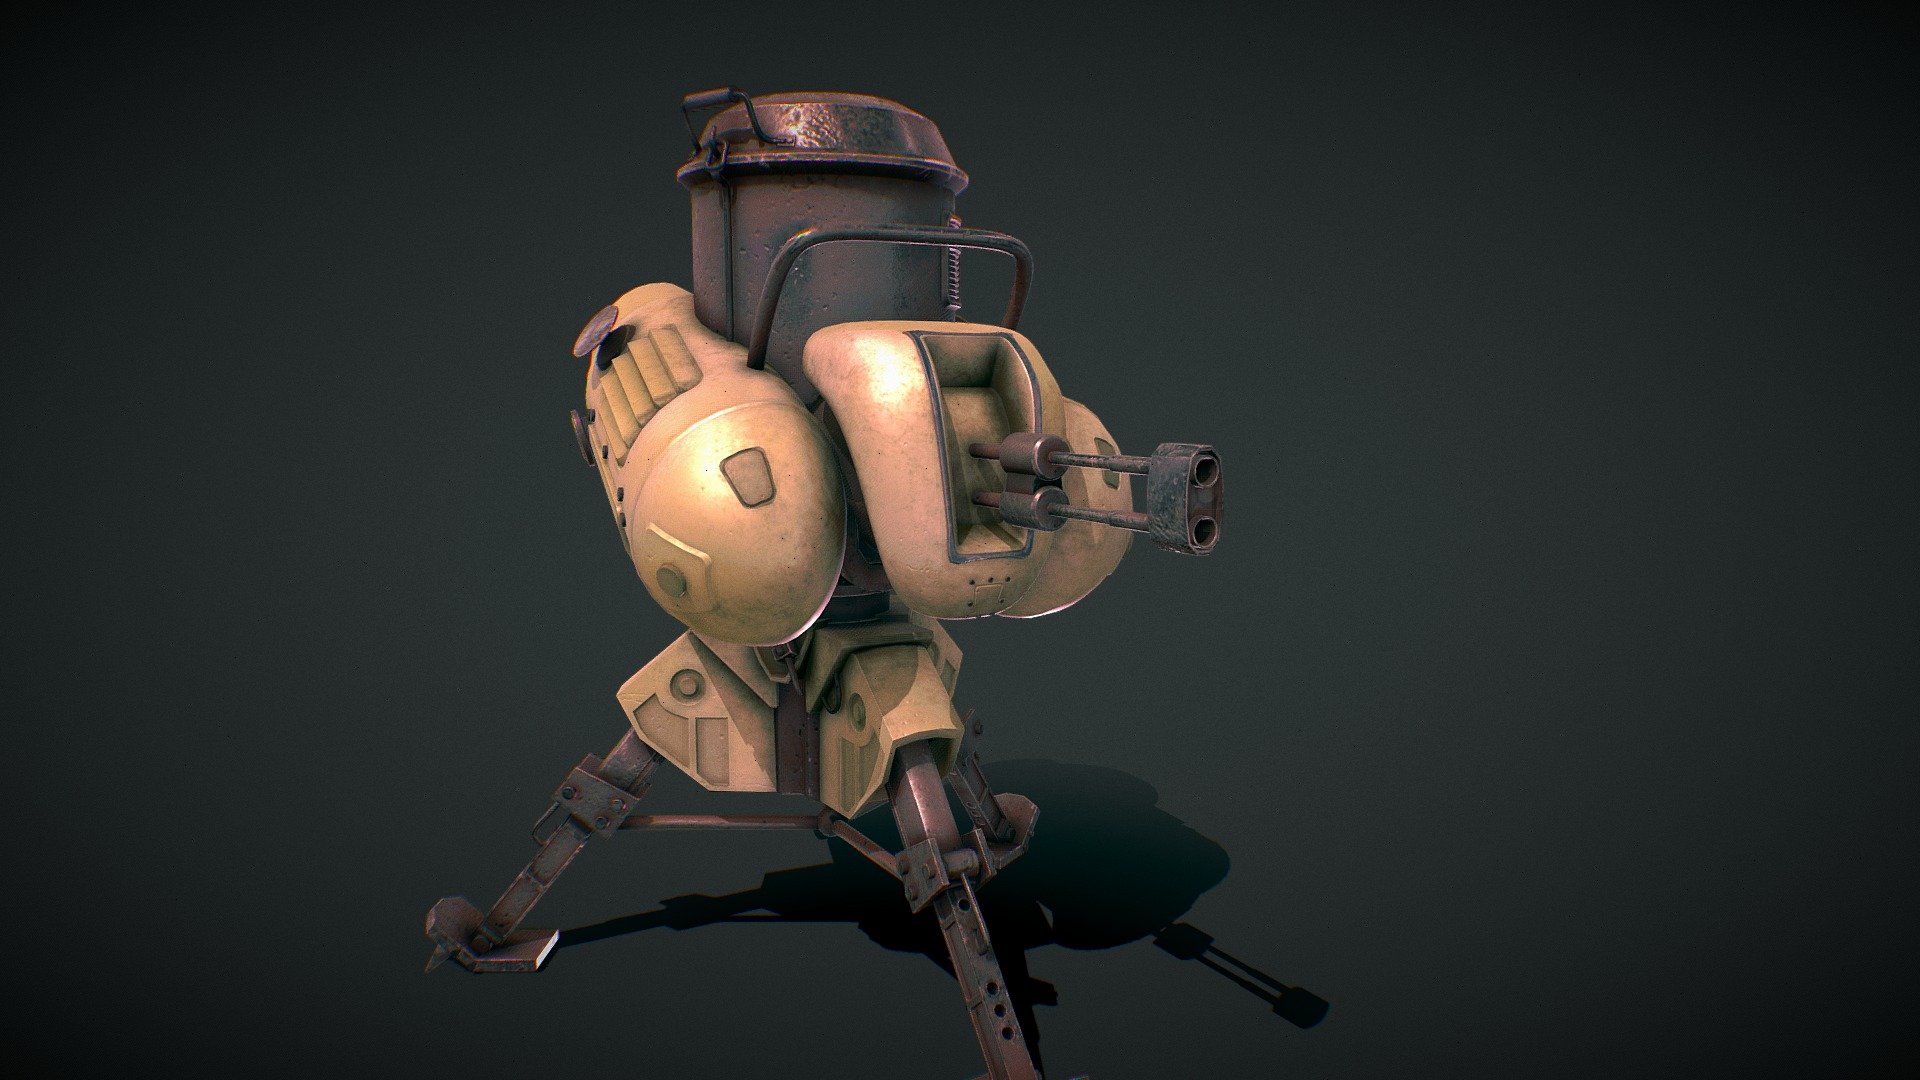 Fan Art from Fallout 4 ( an open-world action game belonging to the Fallout series, created by Bethesda Game Studios. )

More info about game: https://fallout.fandom.com/wiki/Fallout_4

Model made in Blender and Substance Painter 

Game Ready

My ArtStation: https://www.artstation.com/amikos - Fallout 4 Automated Turret - 3D model by Amiko (@Amikos) 3d model